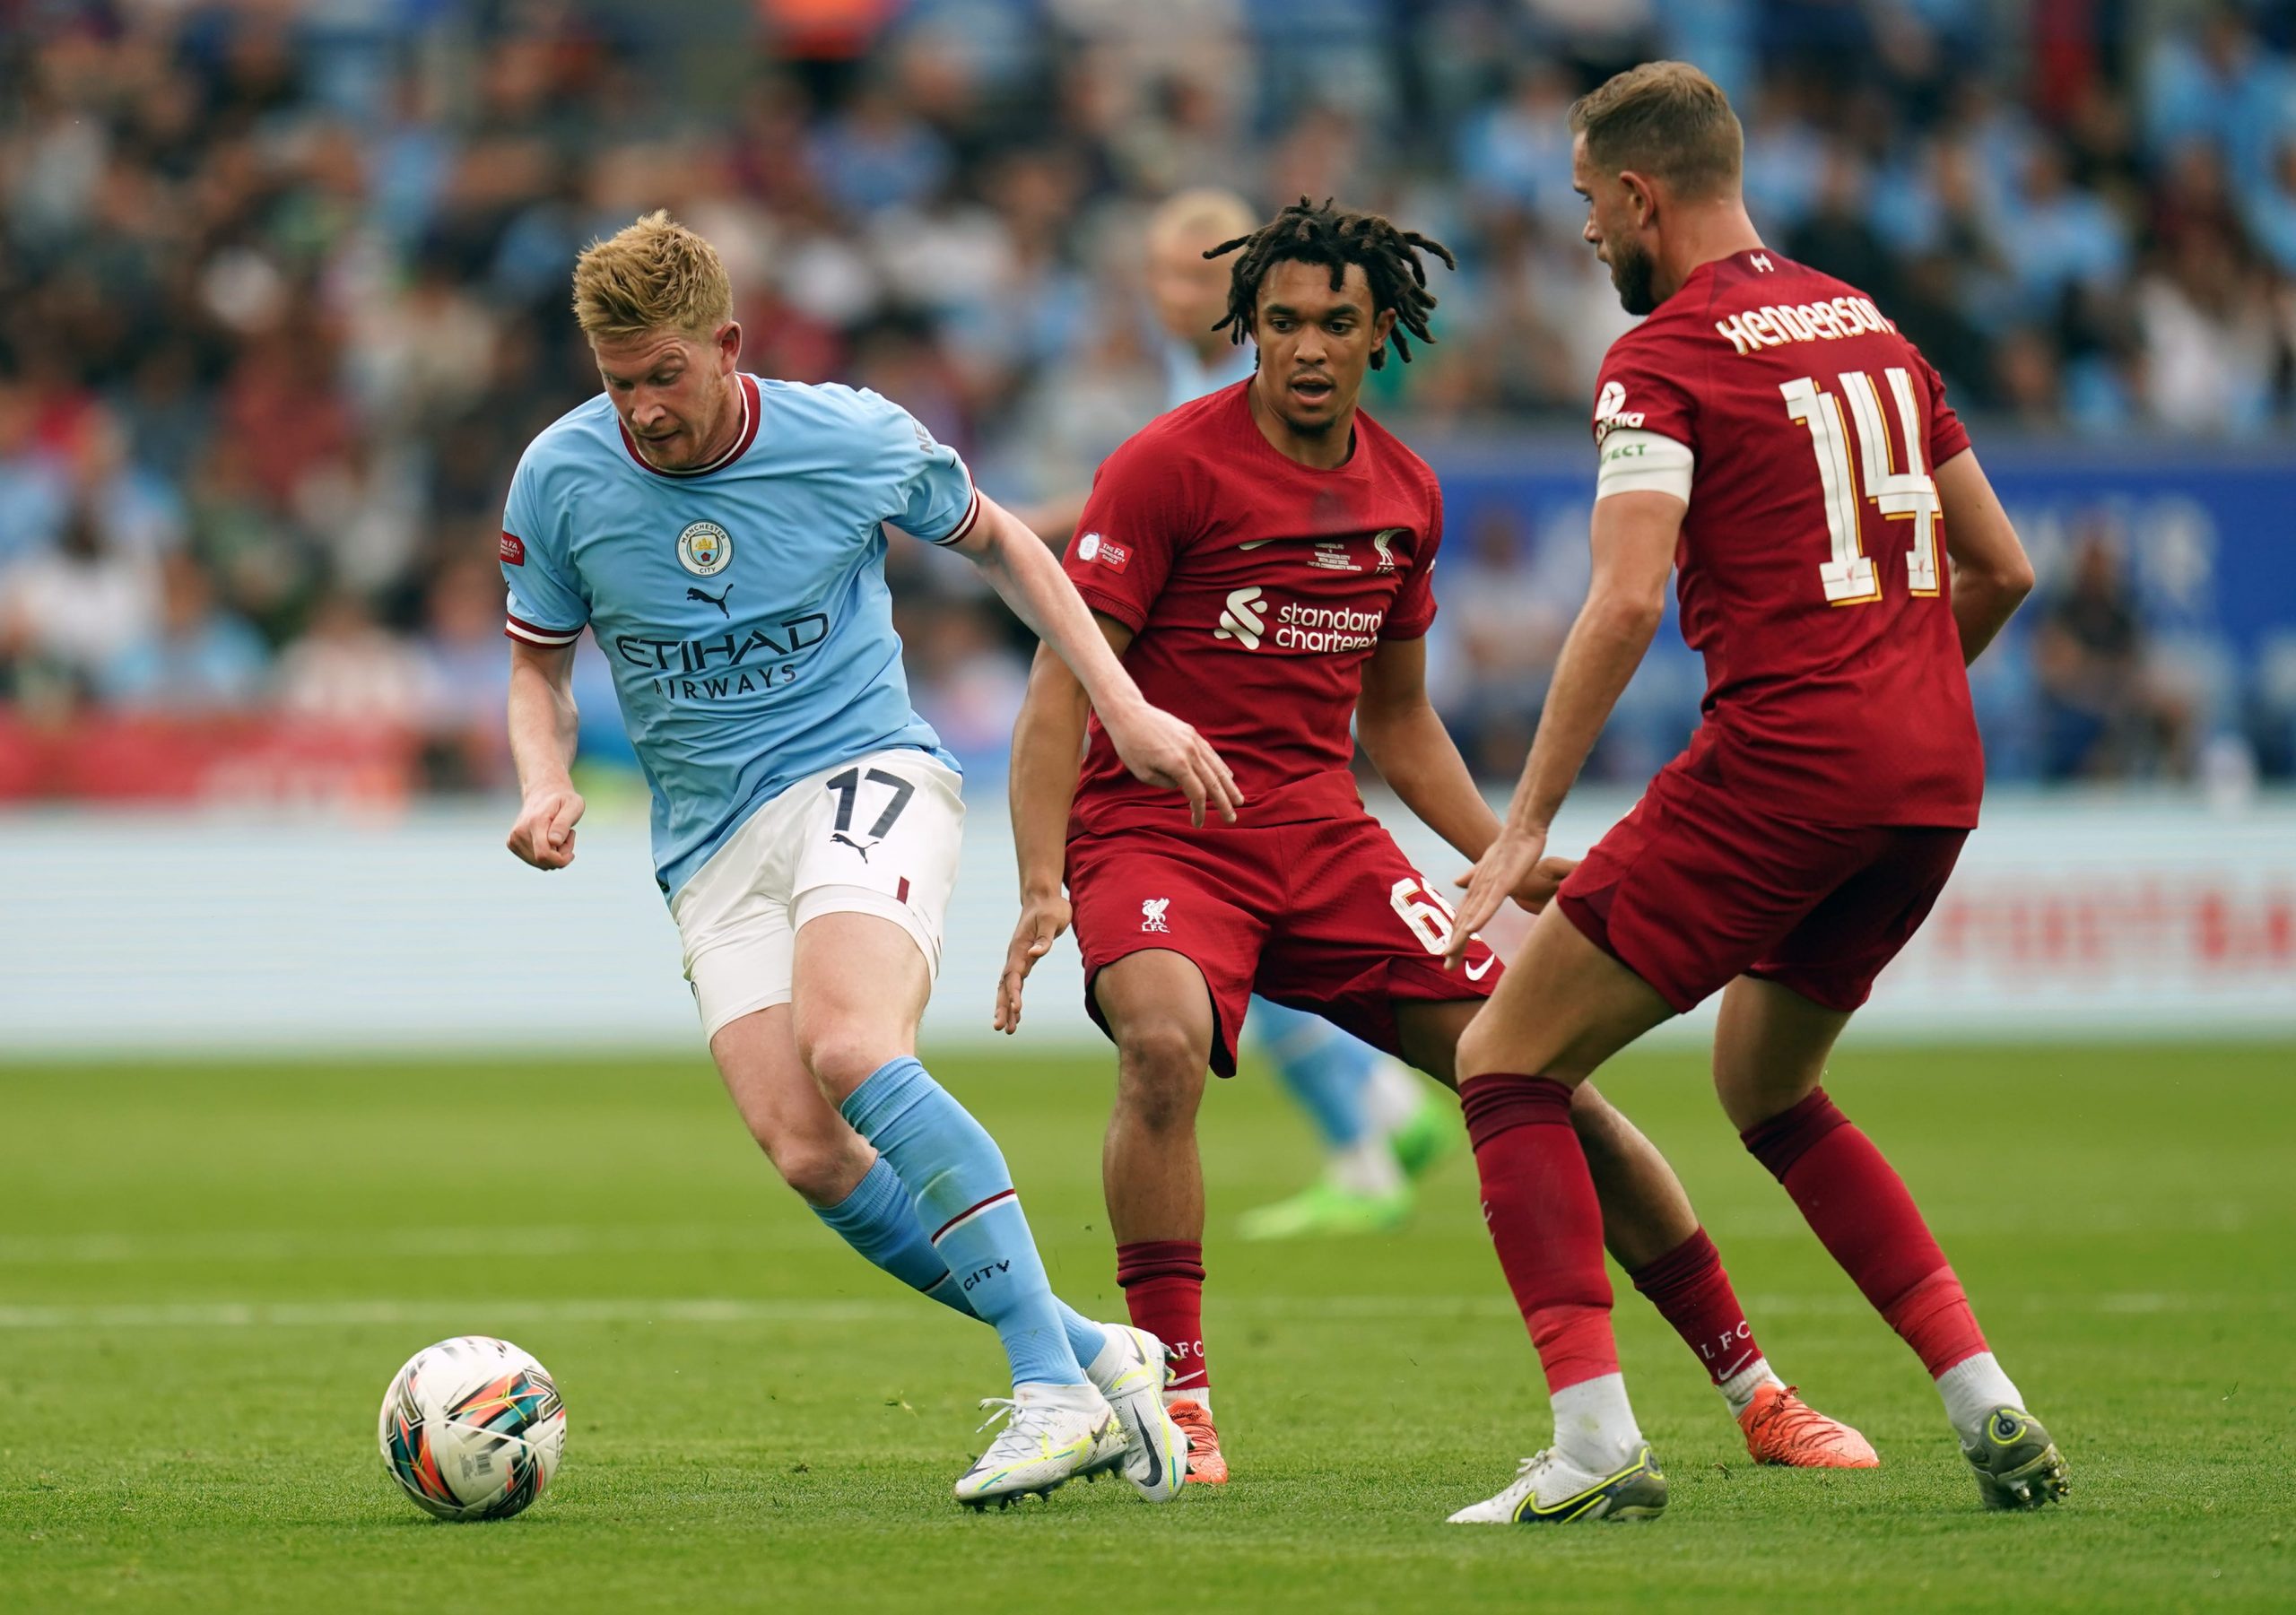 EPL 2022-23 season predictions and best bets: Erling Haaland can fire Manchester City to the title